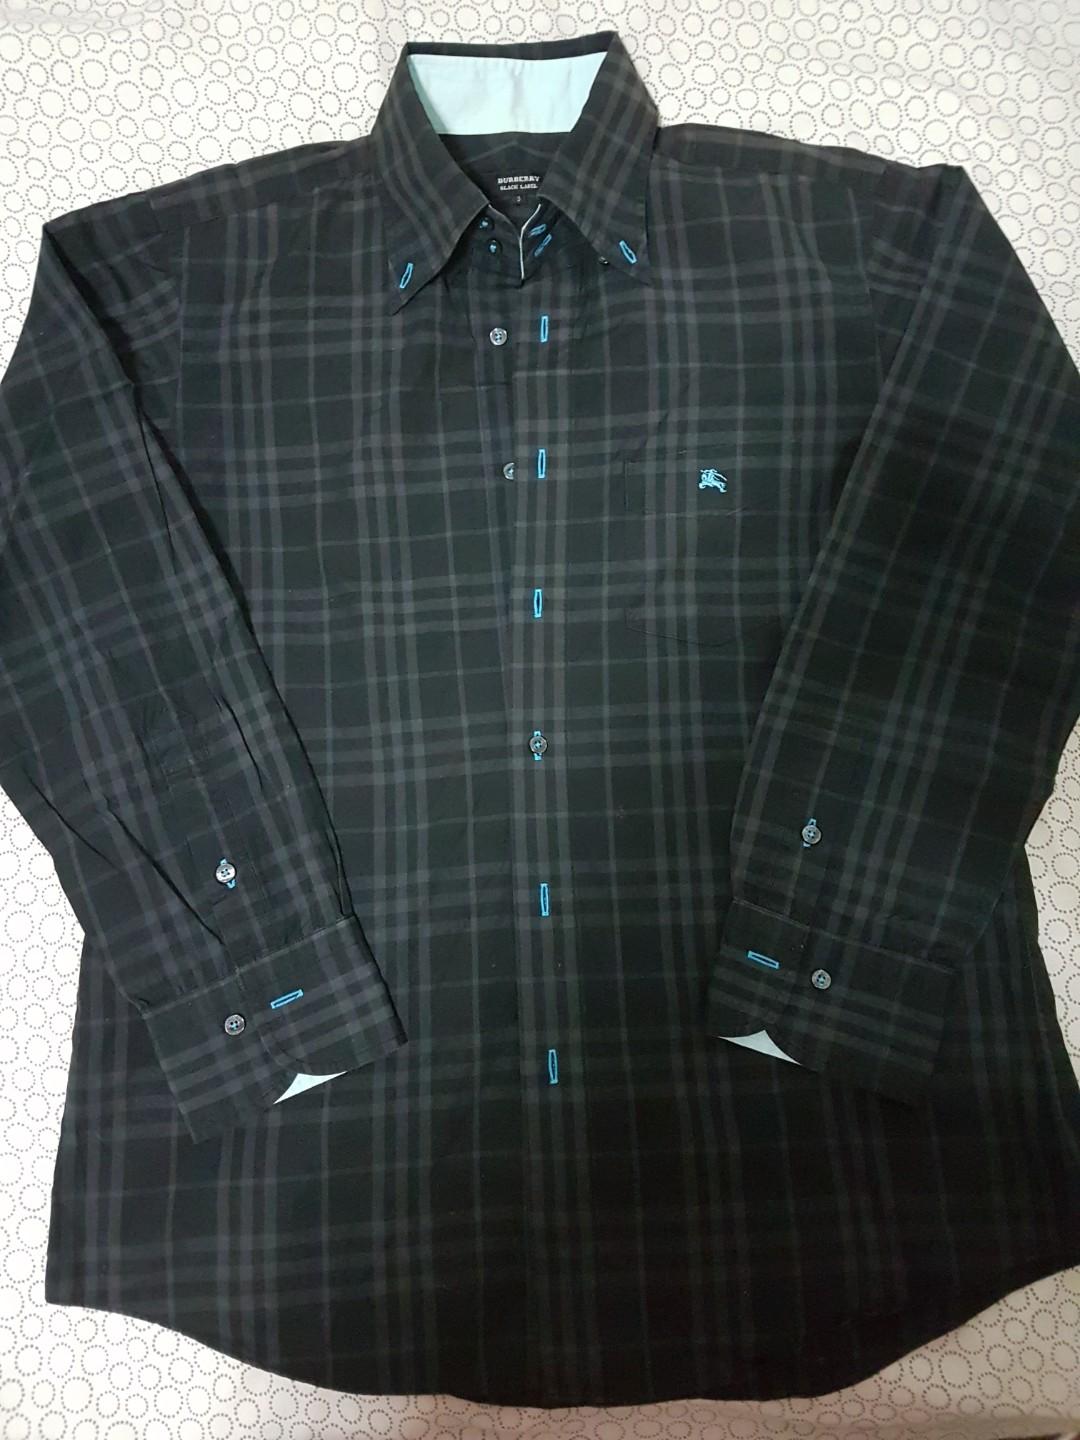 black burberry button up